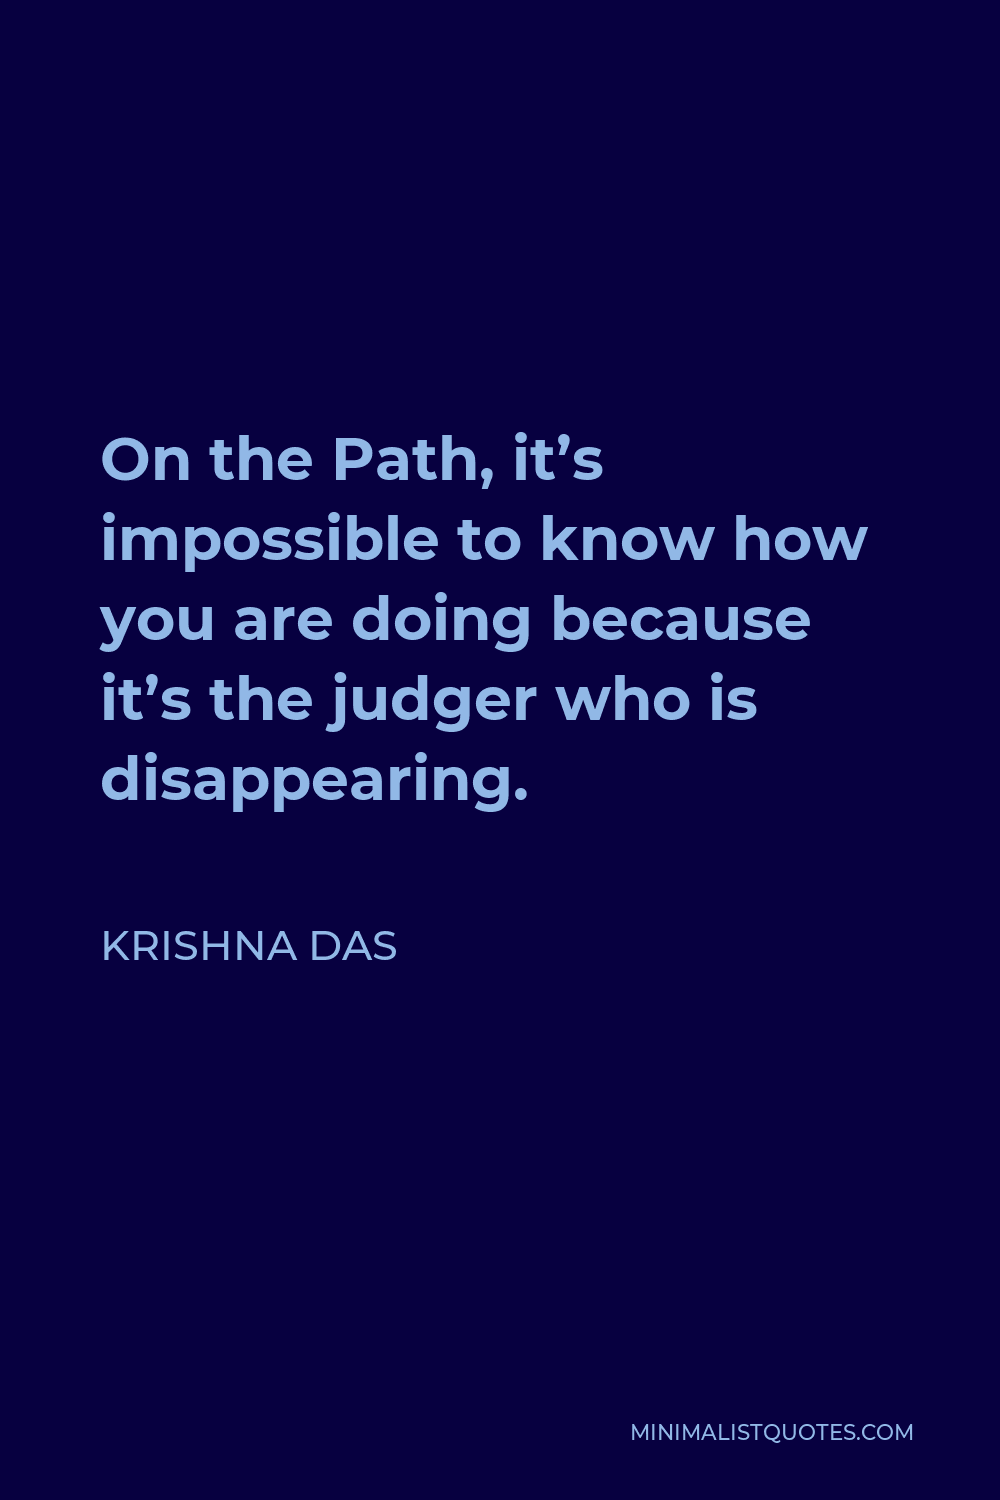 Krishna Das Quote - On the Path, it’s impossible to know how you are doing because it’s the judger who is disappearing.